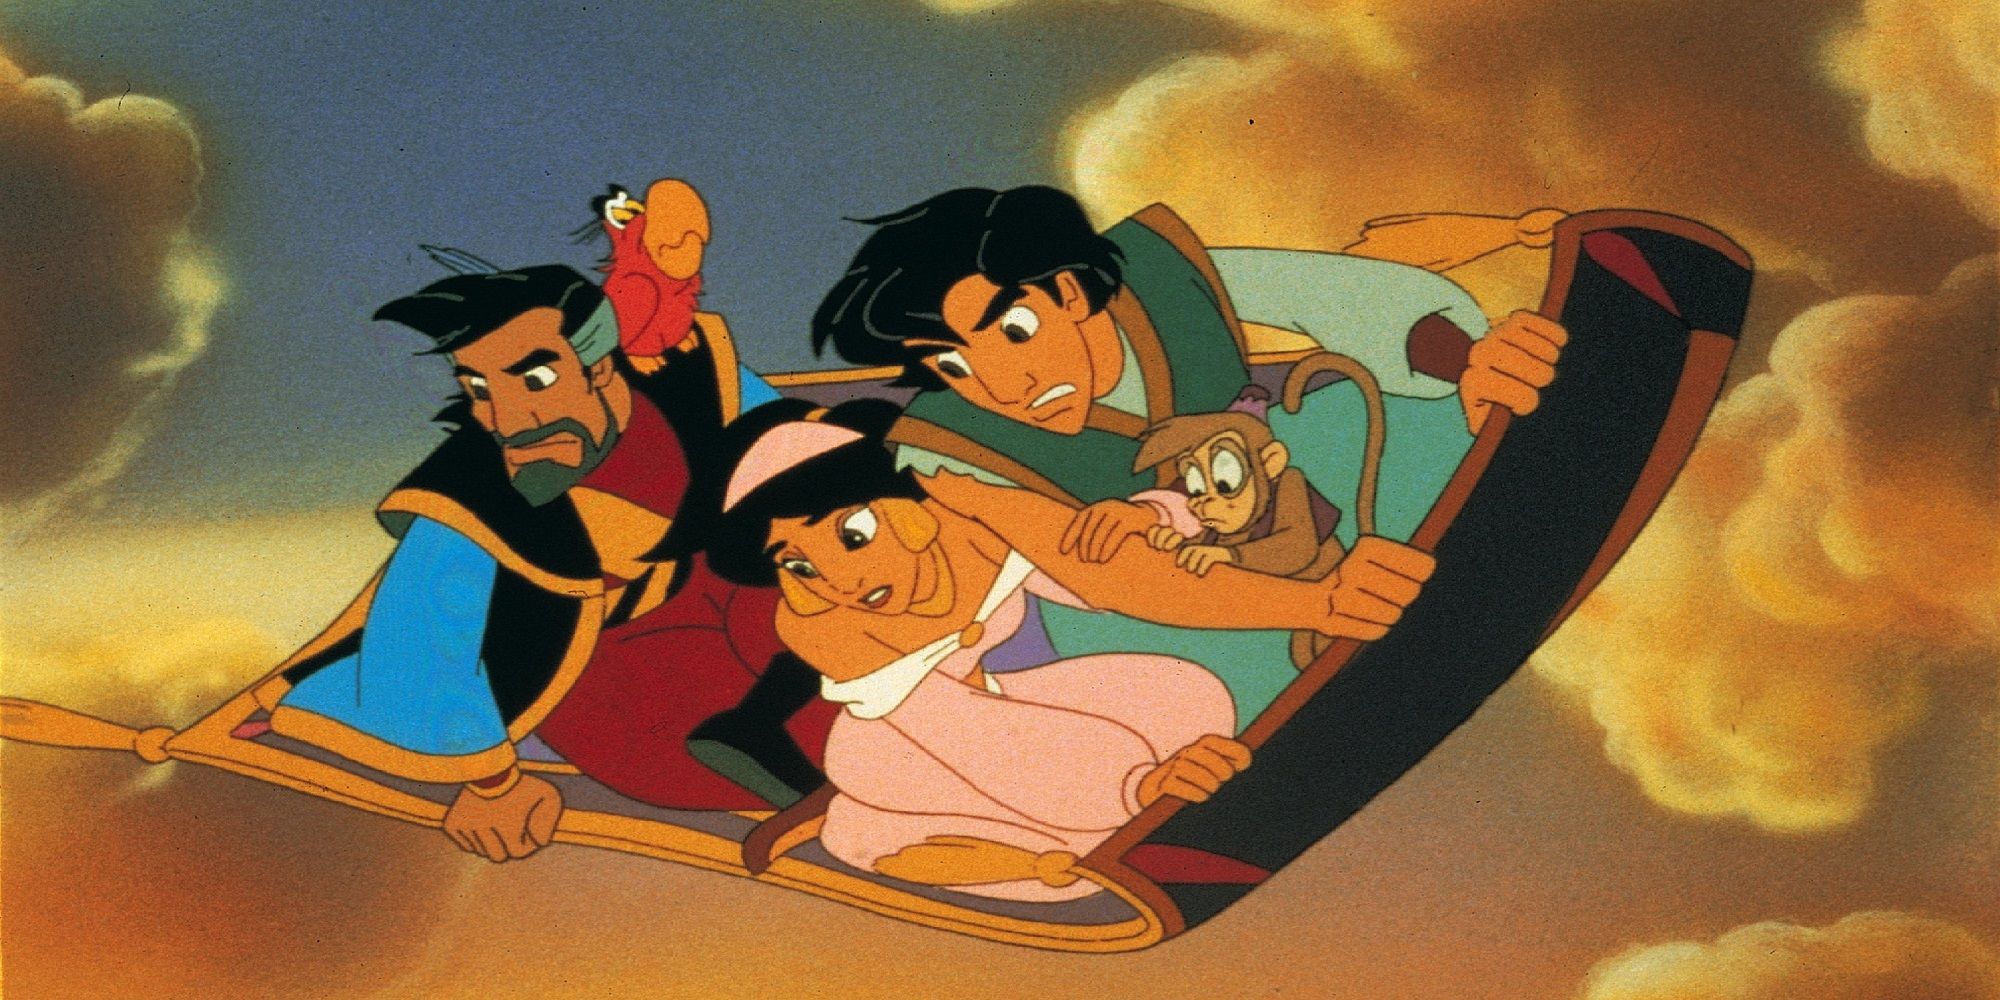 Aladdin and Jasmine with Abu, Iago, and Cassim on the magic carpet in Aladdin and the King Thieves